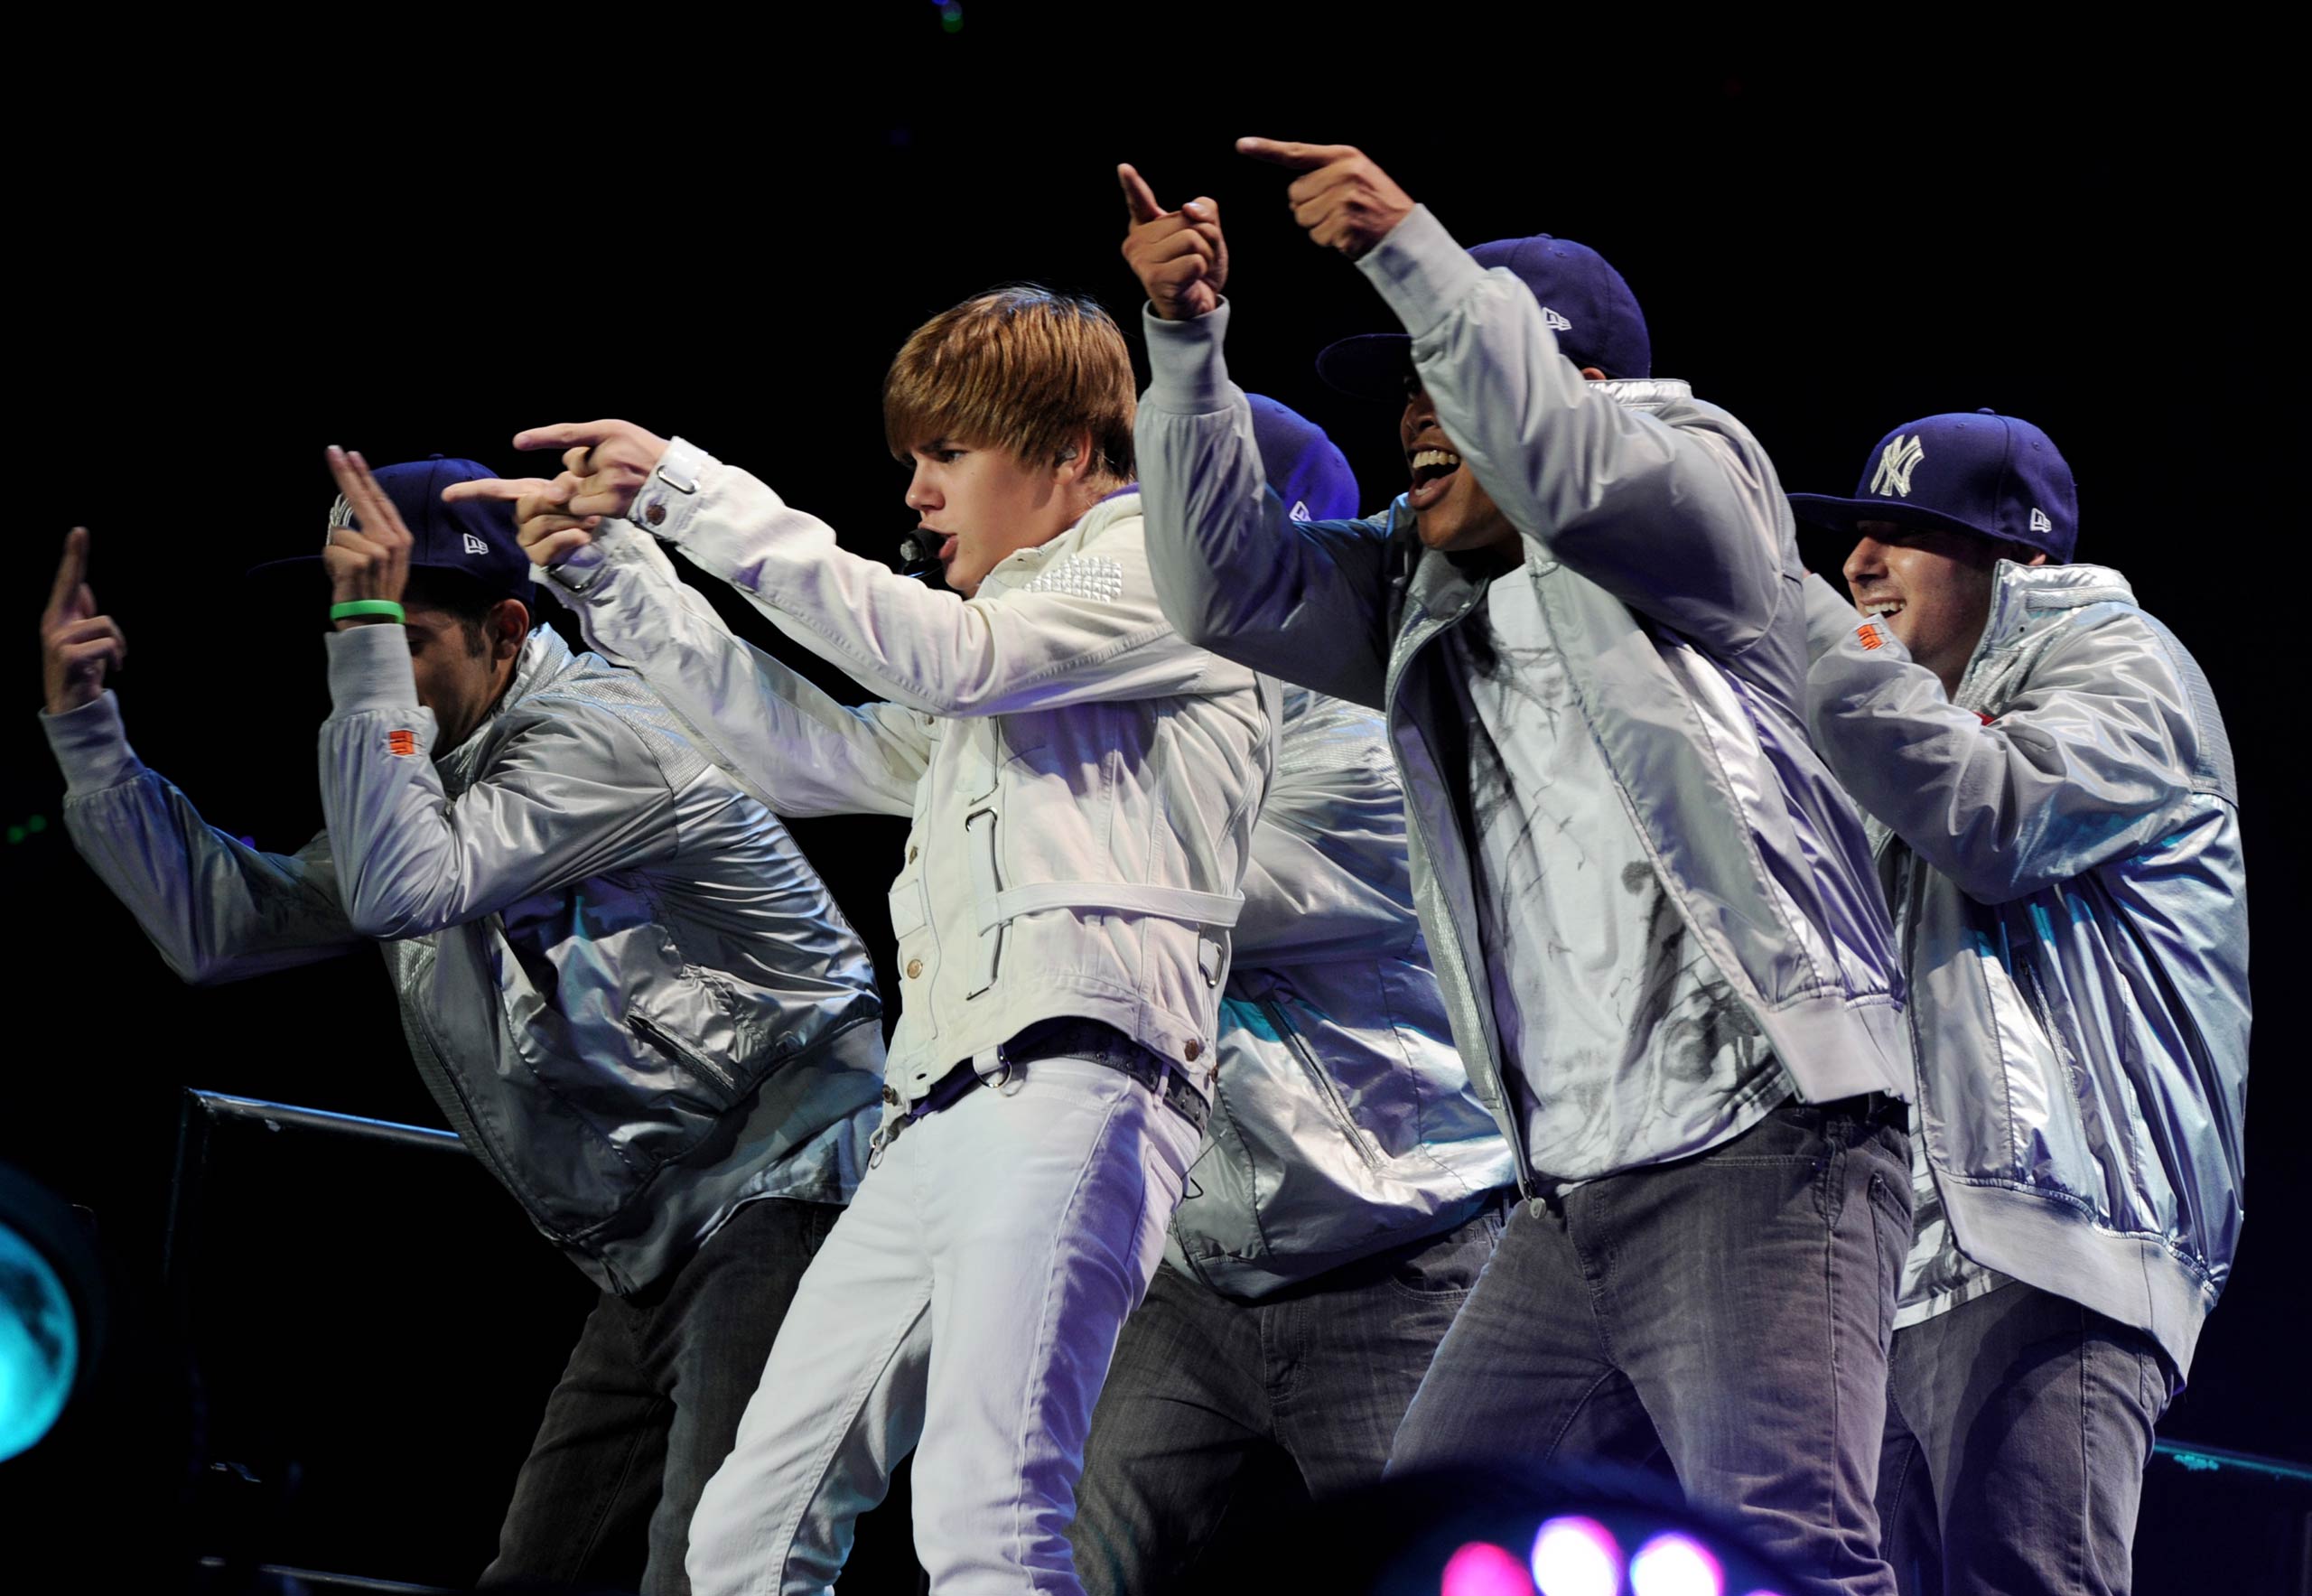 Justin Bieber performs onstage at the Staples Center in Los Angeles, Calif. in 2010.